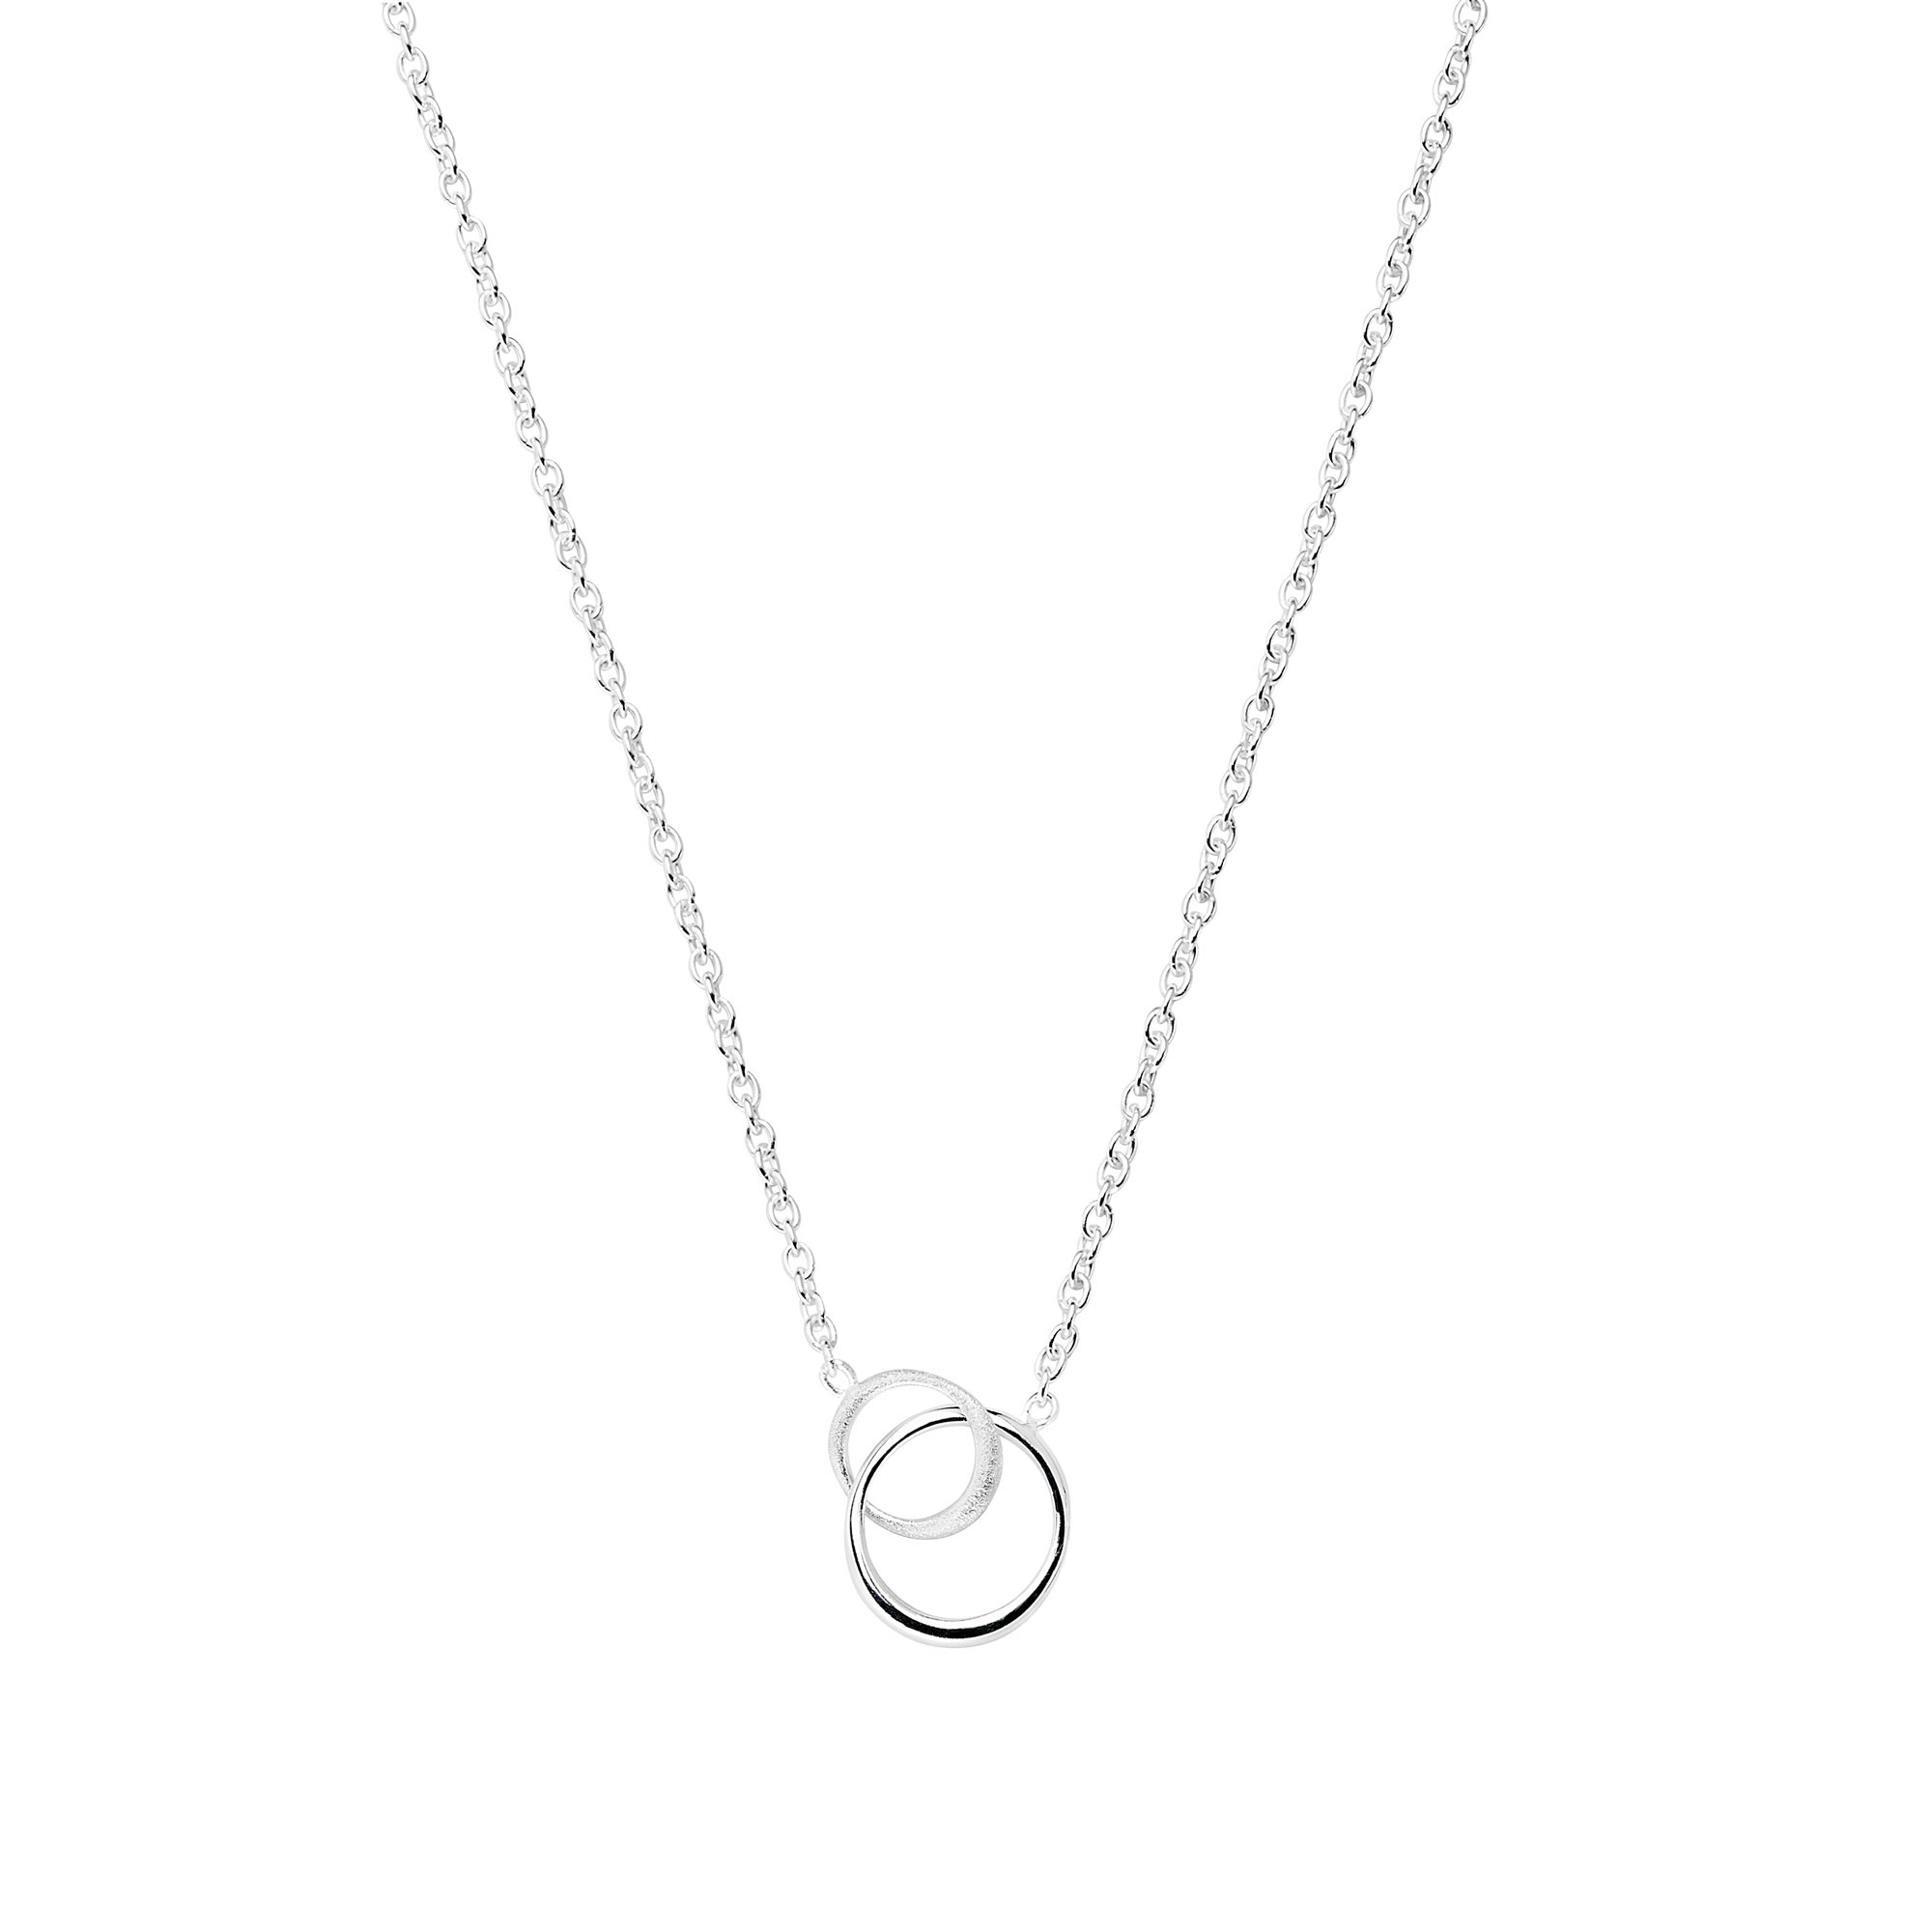 Les amis small single necklace 